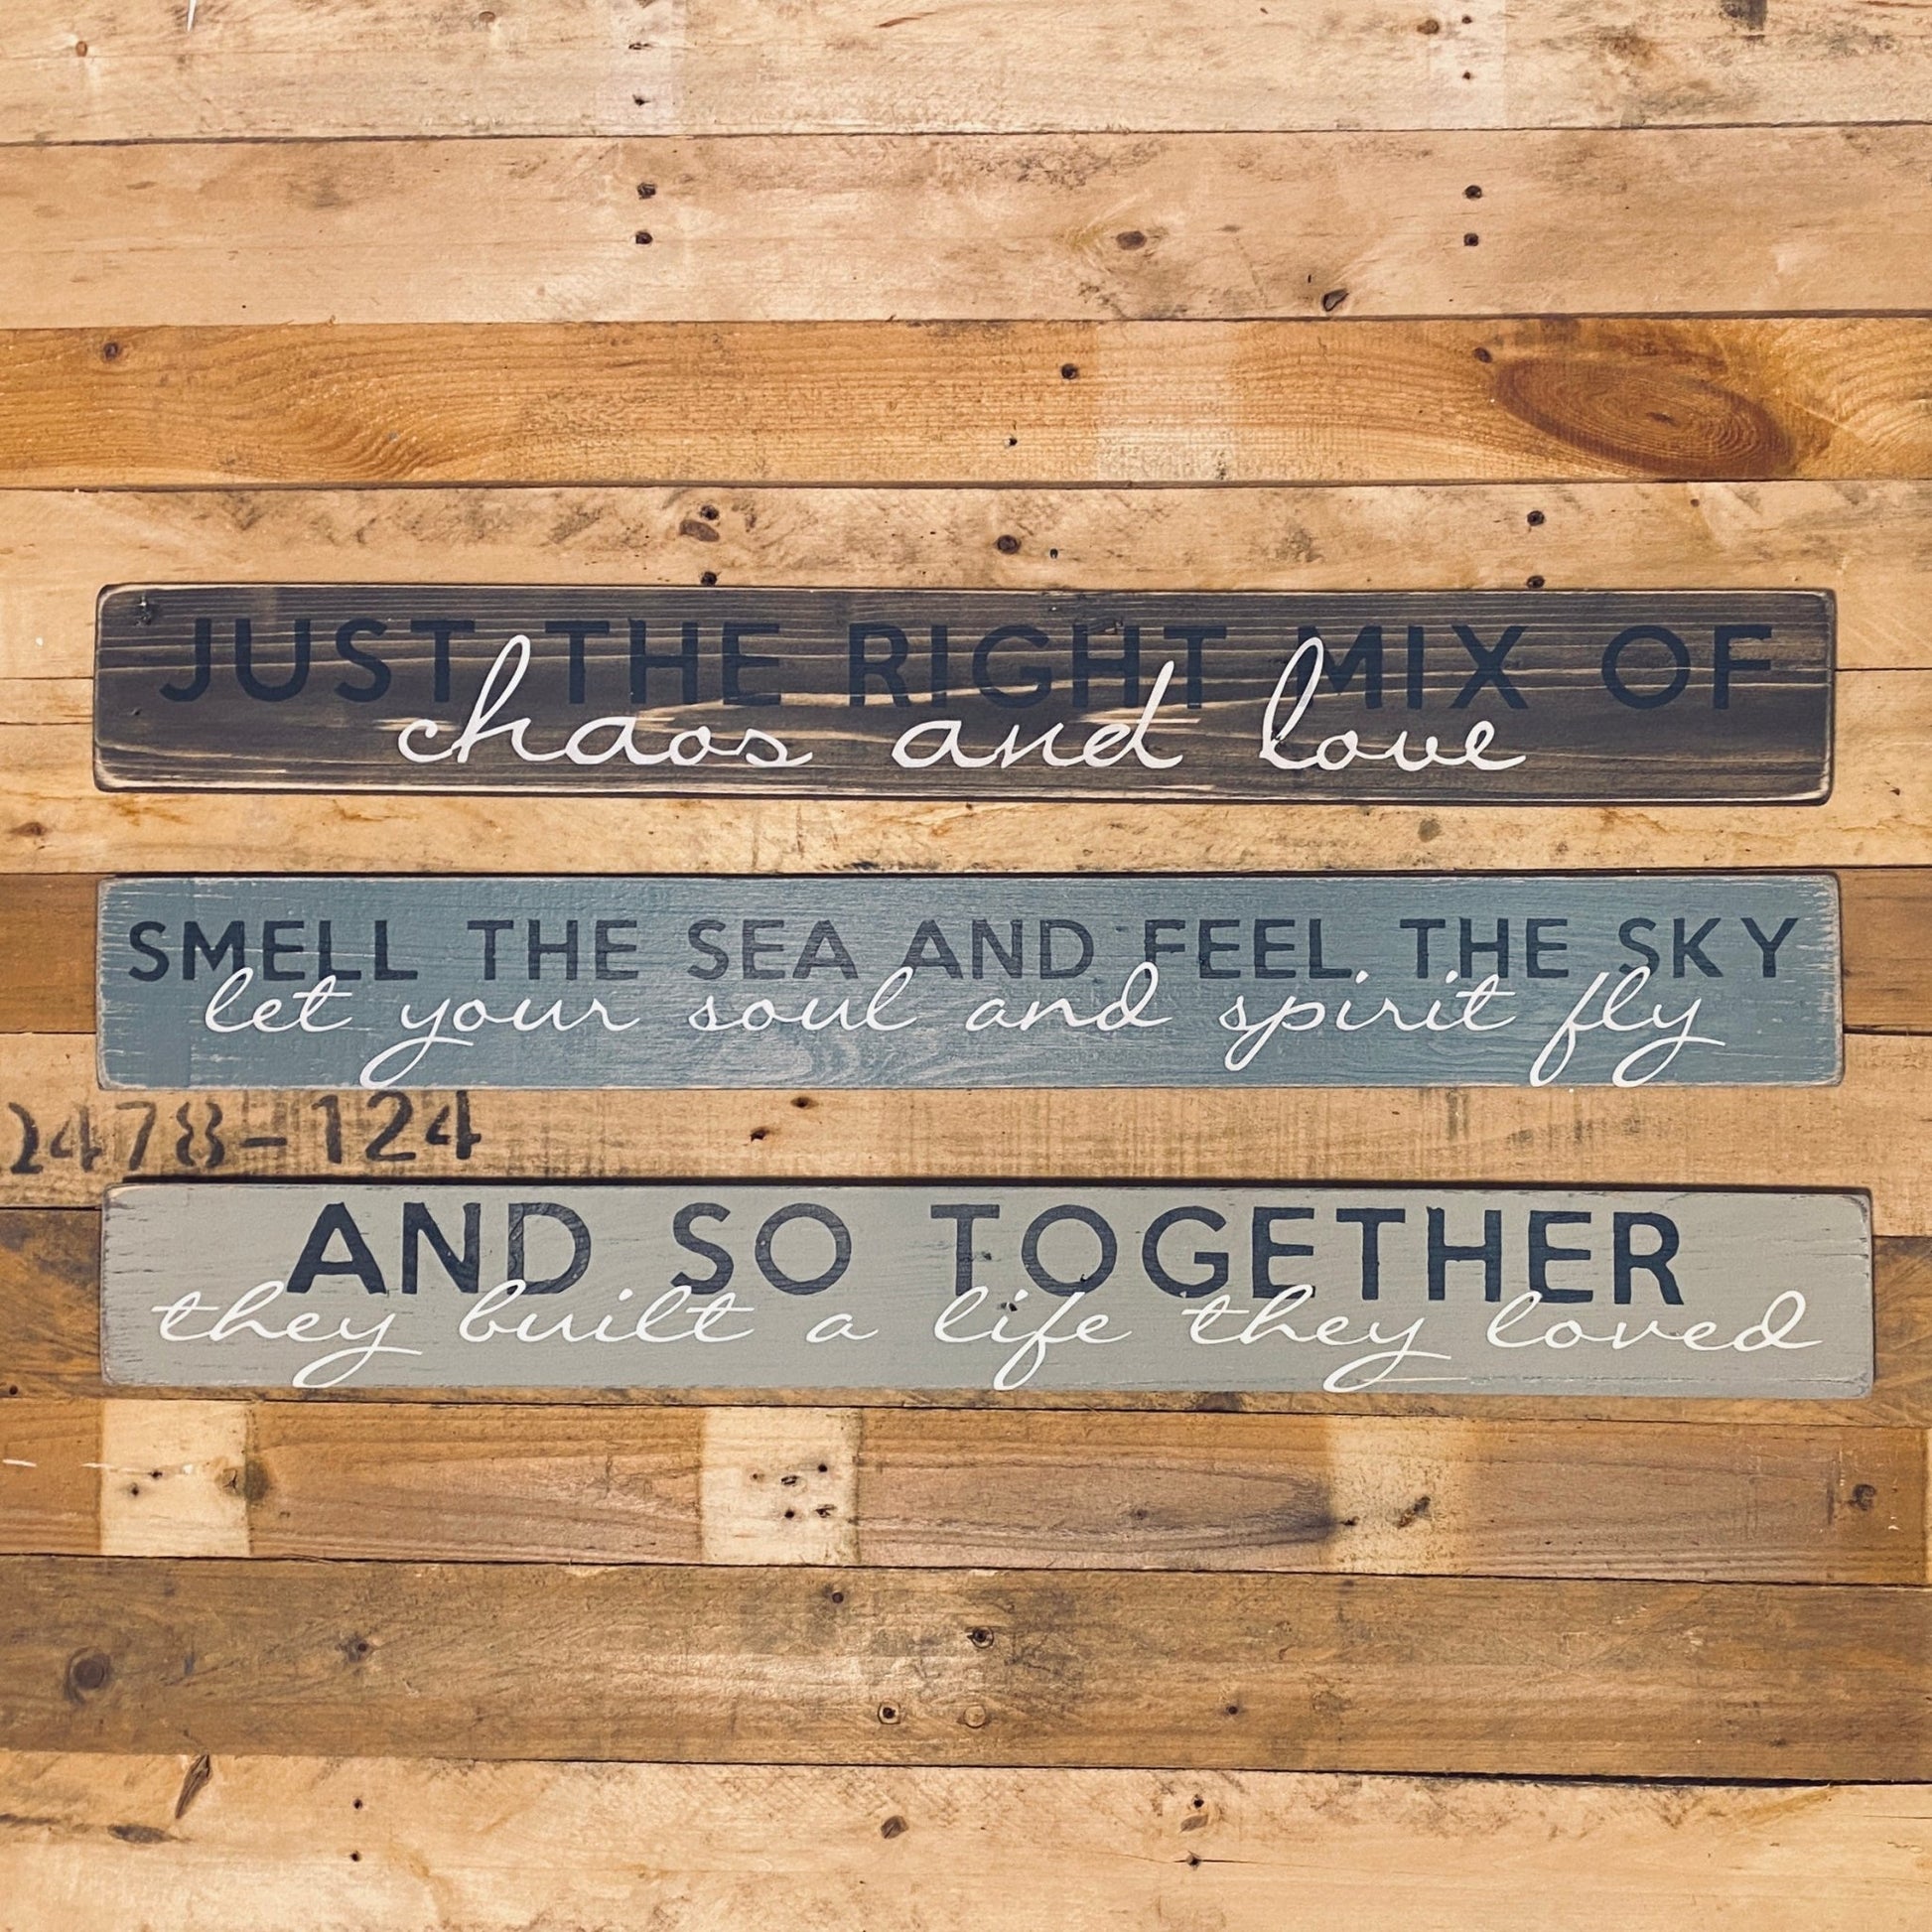 And so together... | Long Wood Sign - The Imperfect Wood Company - Long Wood Sign